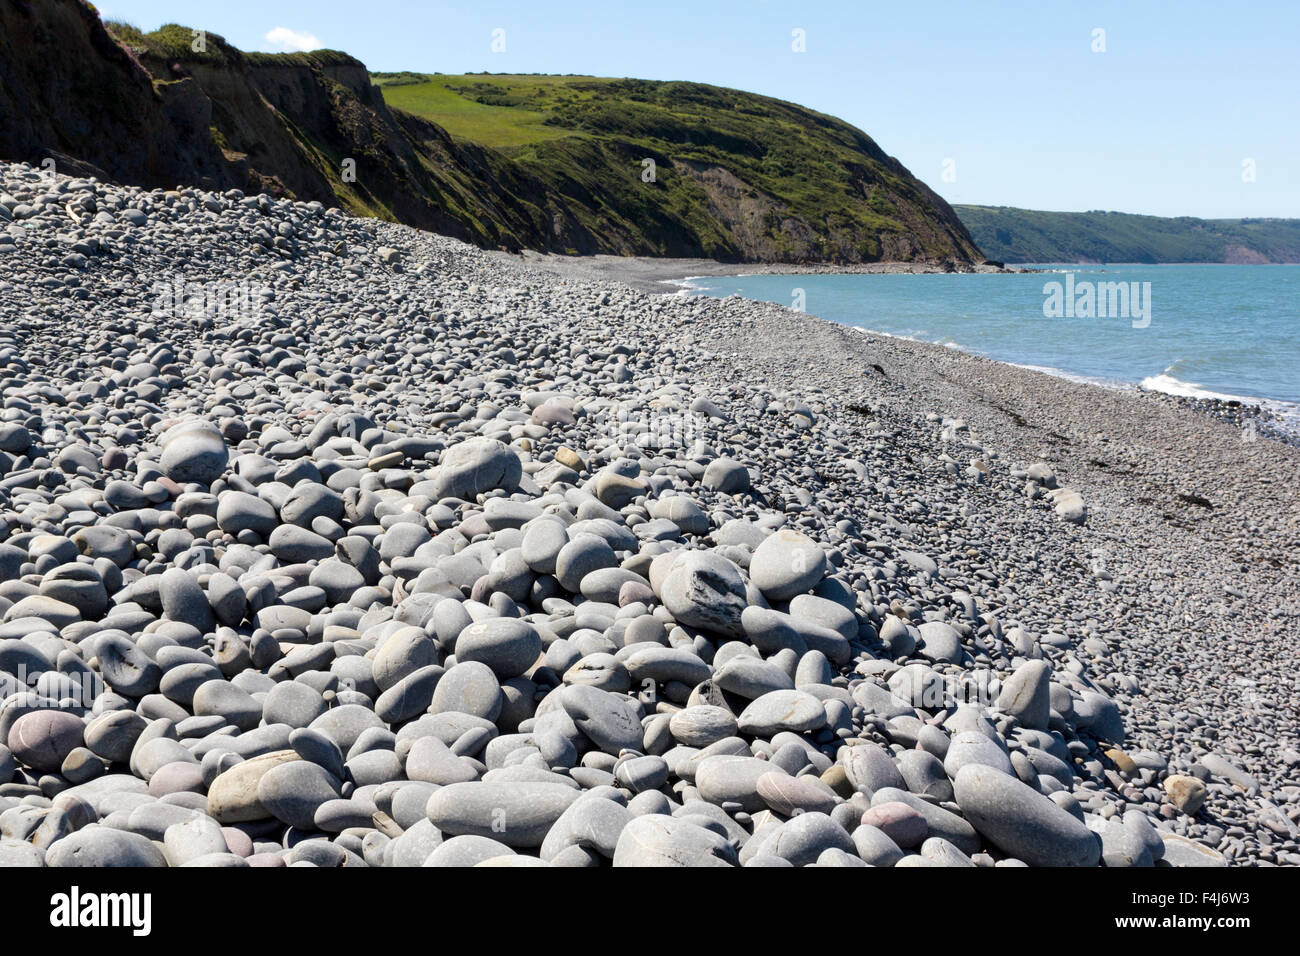 Pebbles at Greencliff Beach – A View at High Tide, Looking South West towards Bucks Mills, Devon, UK. Stock Photo